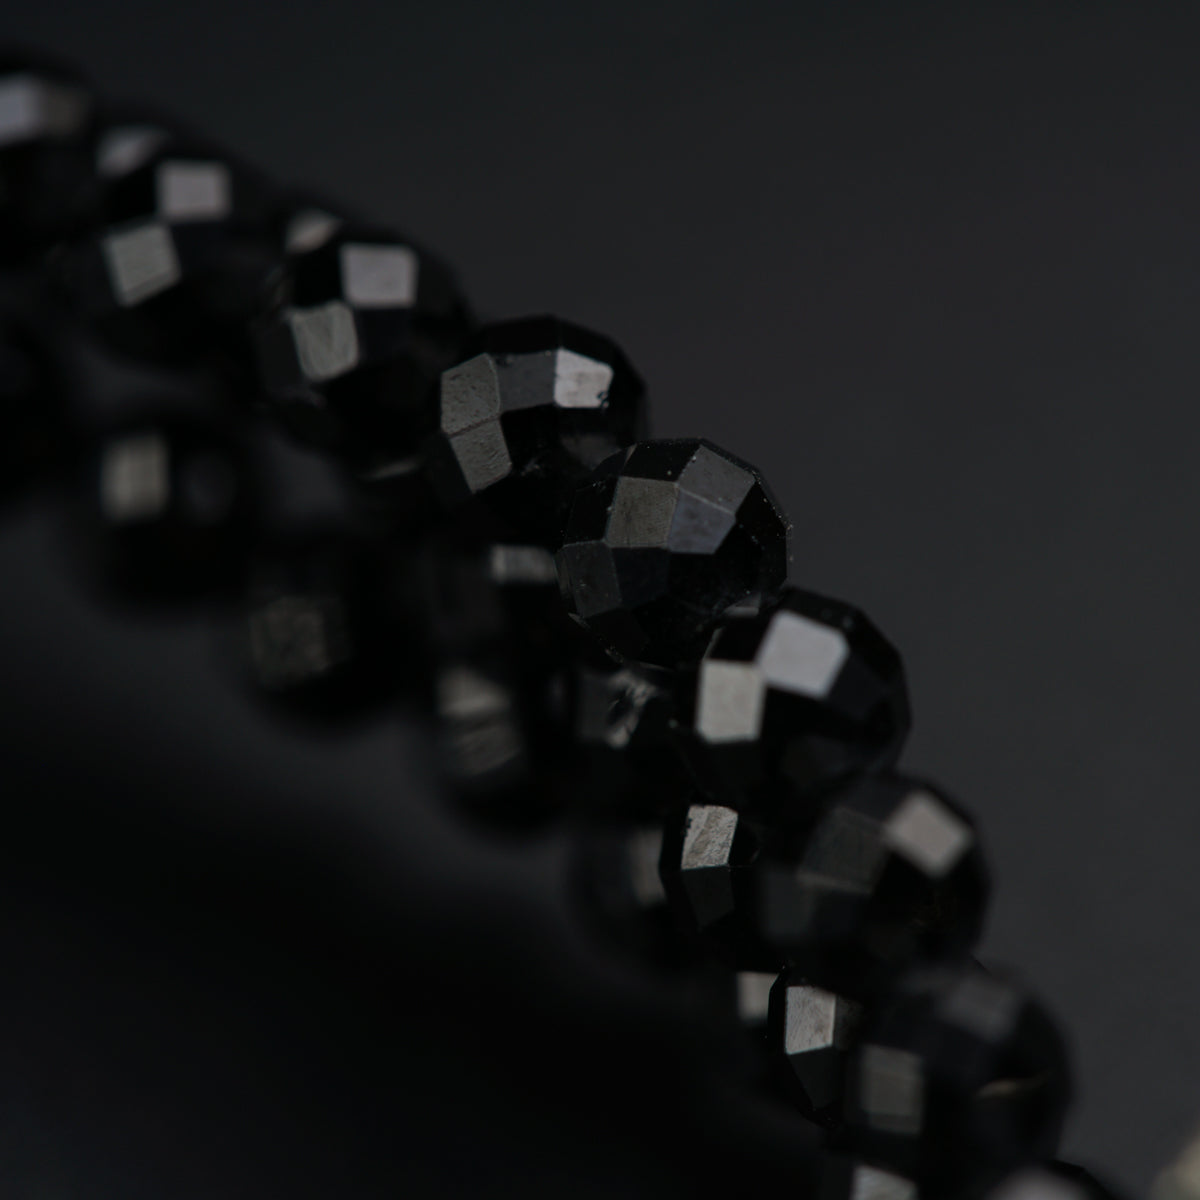 a close up of a toothbrush with black beads